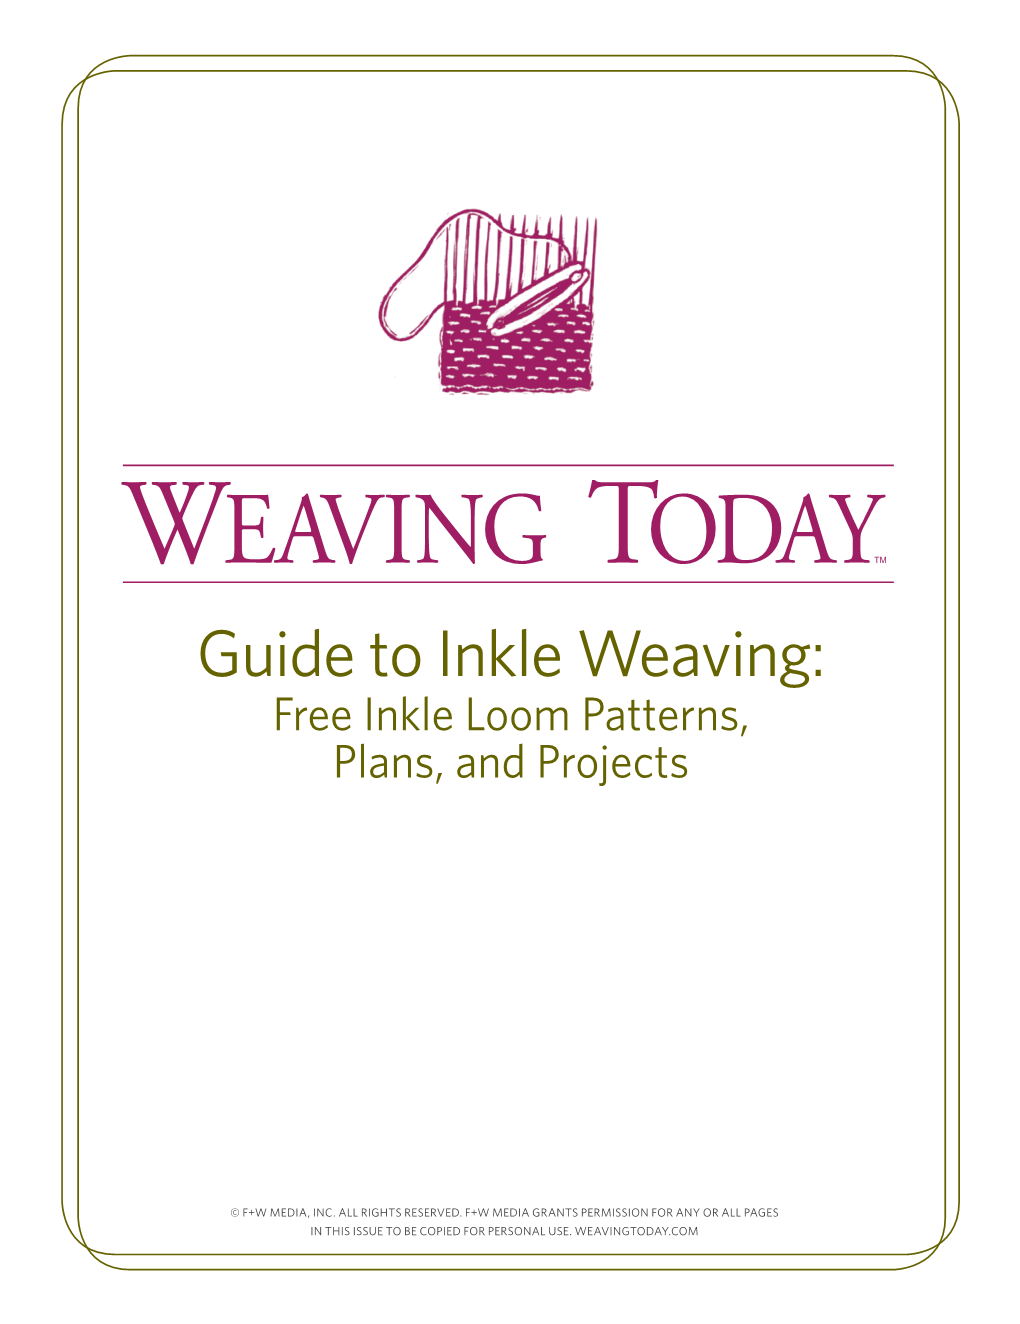 Weaving Today Guide to Inkle Weaving